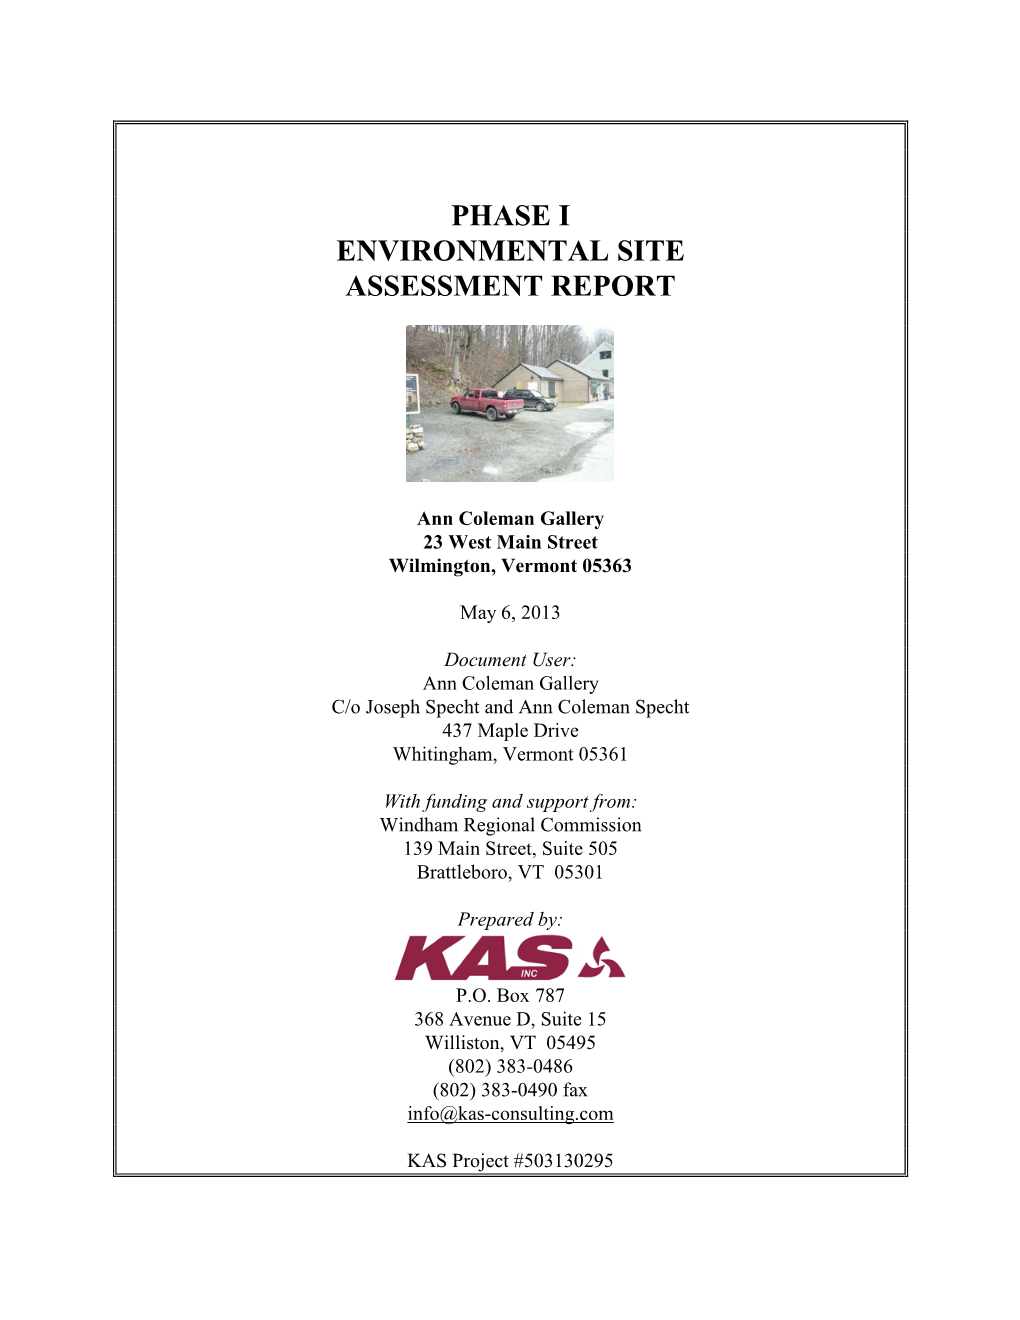 Phase I ESA Report in Accord with ASTM E 1527-05 Using the Best Efforts of Environmental Professionals and Information Available at the Time of Preparation